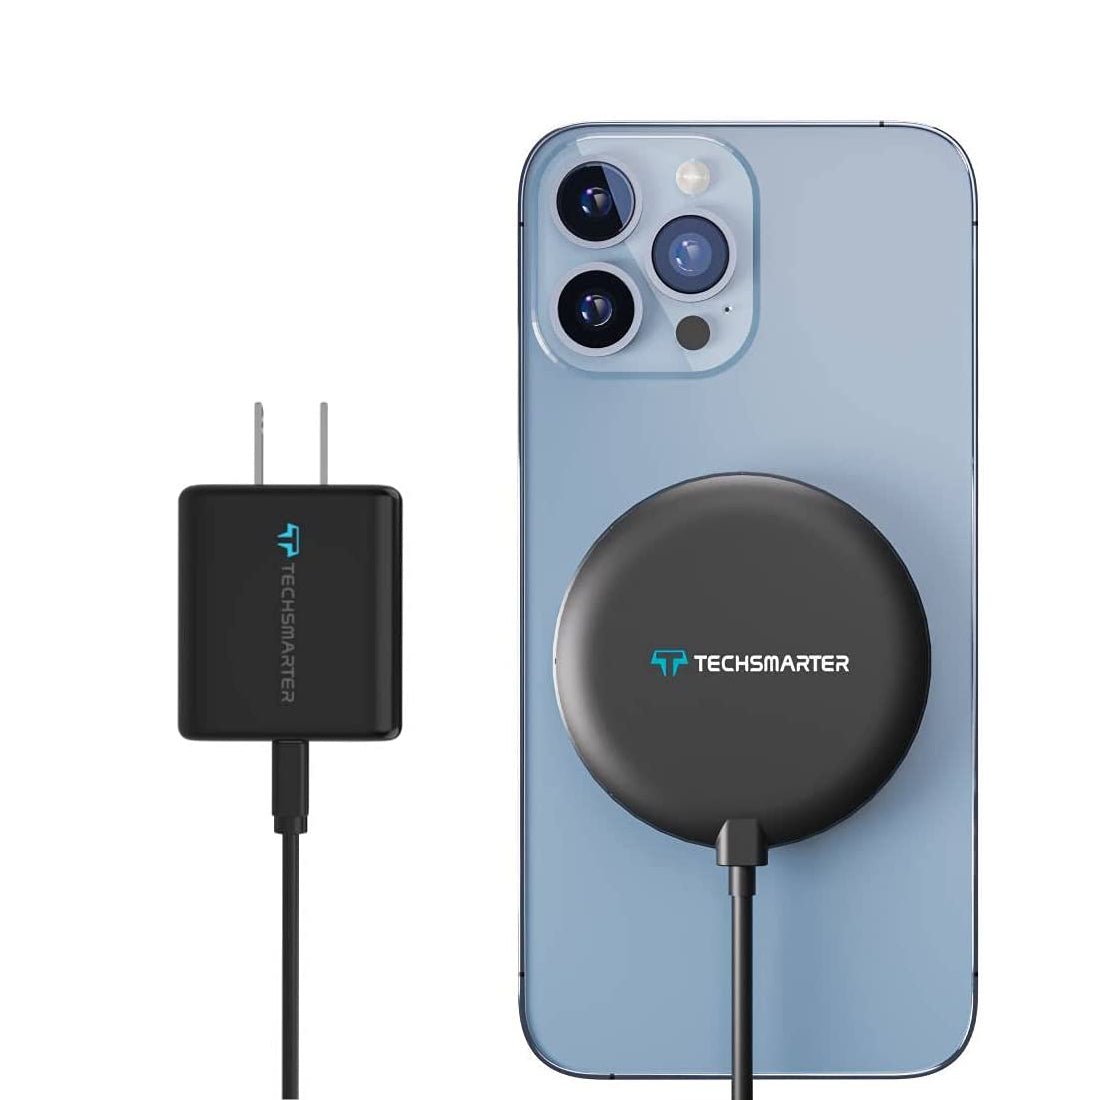 Techsmarter Magnetic Qi Wireless Charger Pad - شاحن - Store 974 | ستور ٩٧٤